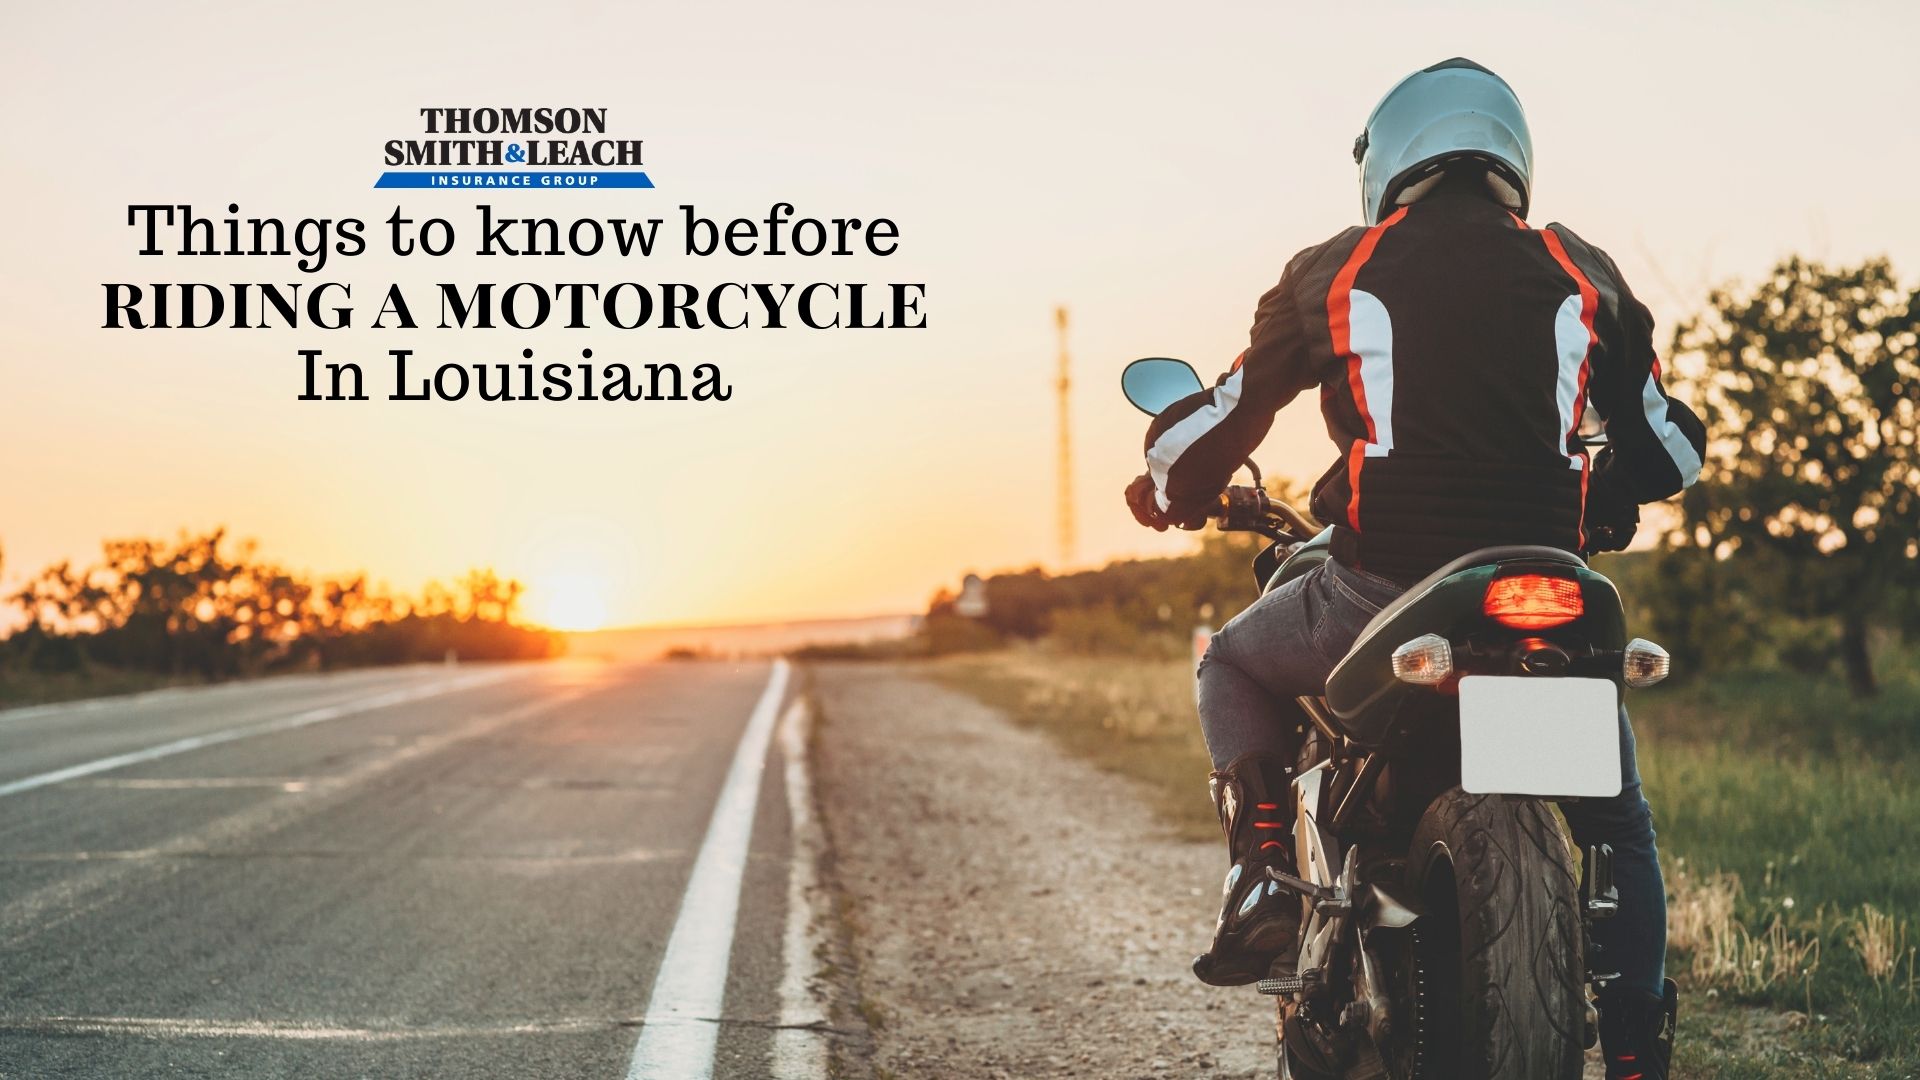 Riding a motorcycle in Louisiana